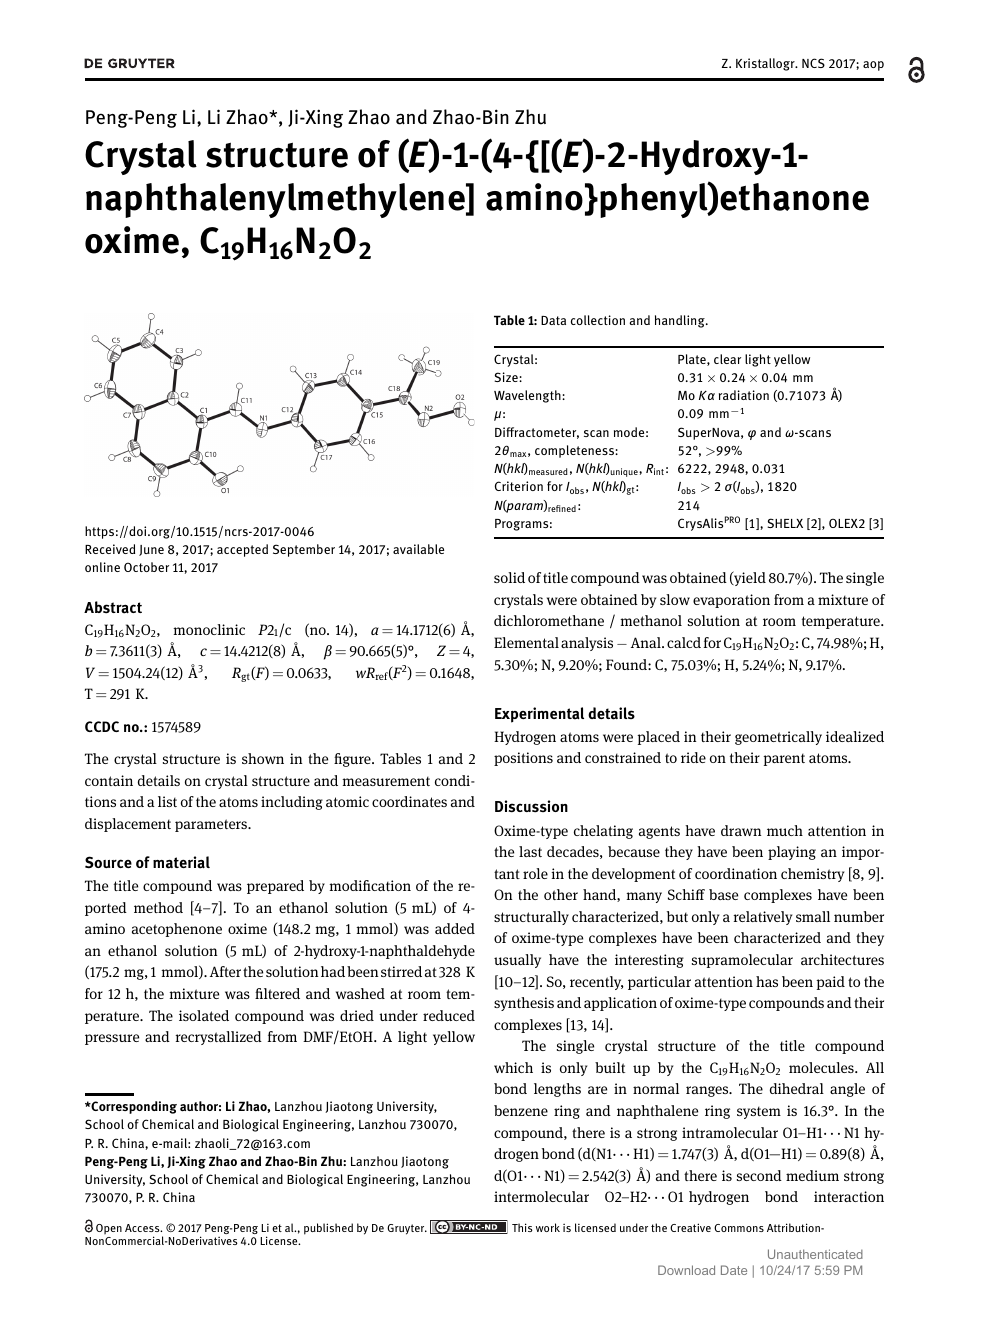 Crystal Structure Of E 1 4 E 2 Hydroxy 1 Naphthalenylmethylene Amino Phenyl Ethanone Oxime C19h16n2o2 Topic Of Research Paper In Chemical Sciences Download Scholarly Article Pdf And Read For Free On Cyberleninka Open Science Hub